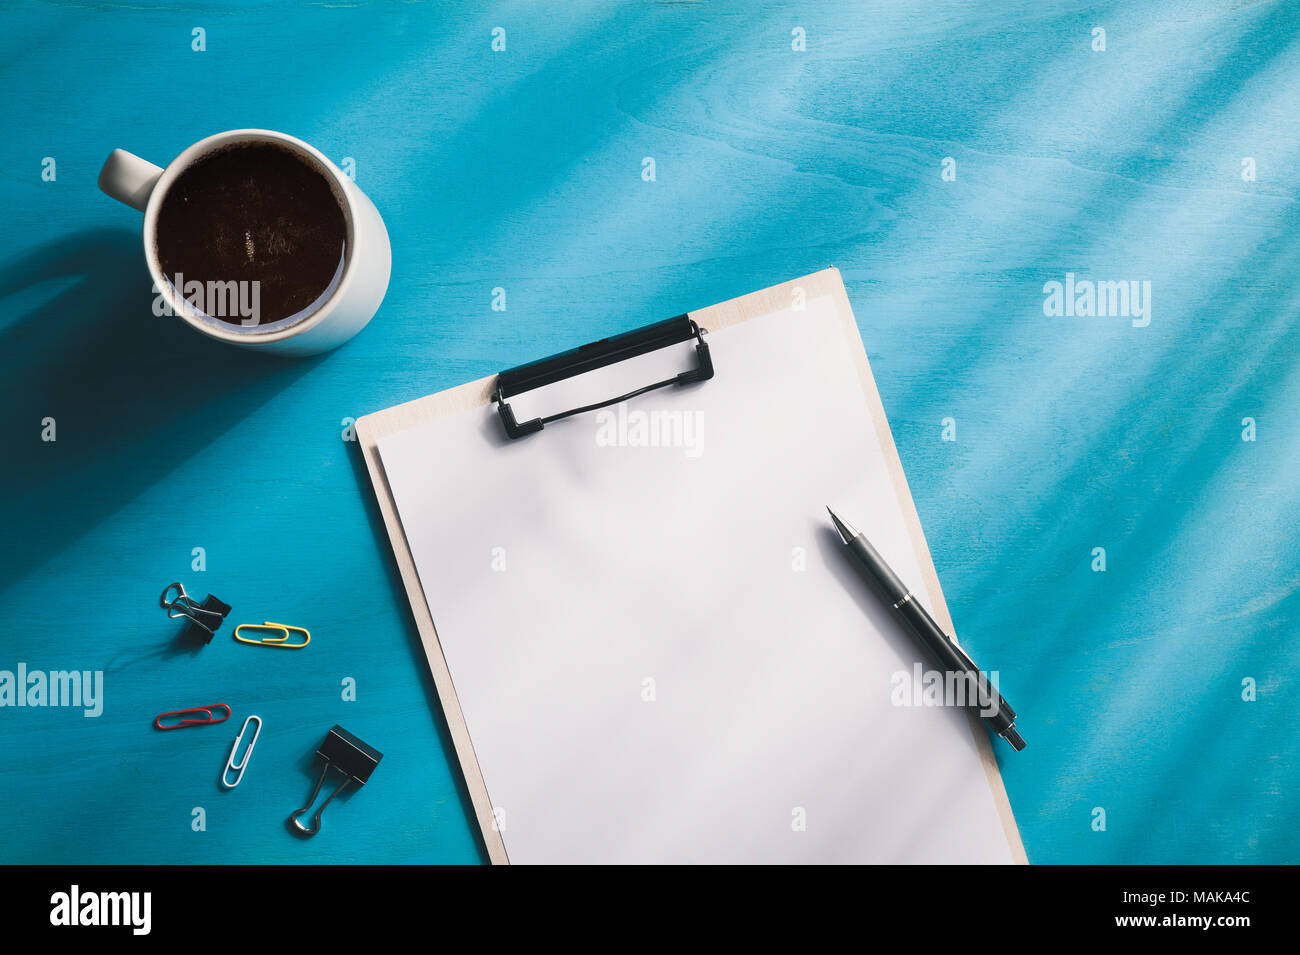 A4 size clipboard and coffee cup on blue wood table with natural lighting effect in morning time. background with blank area for text or message. Stock Photo